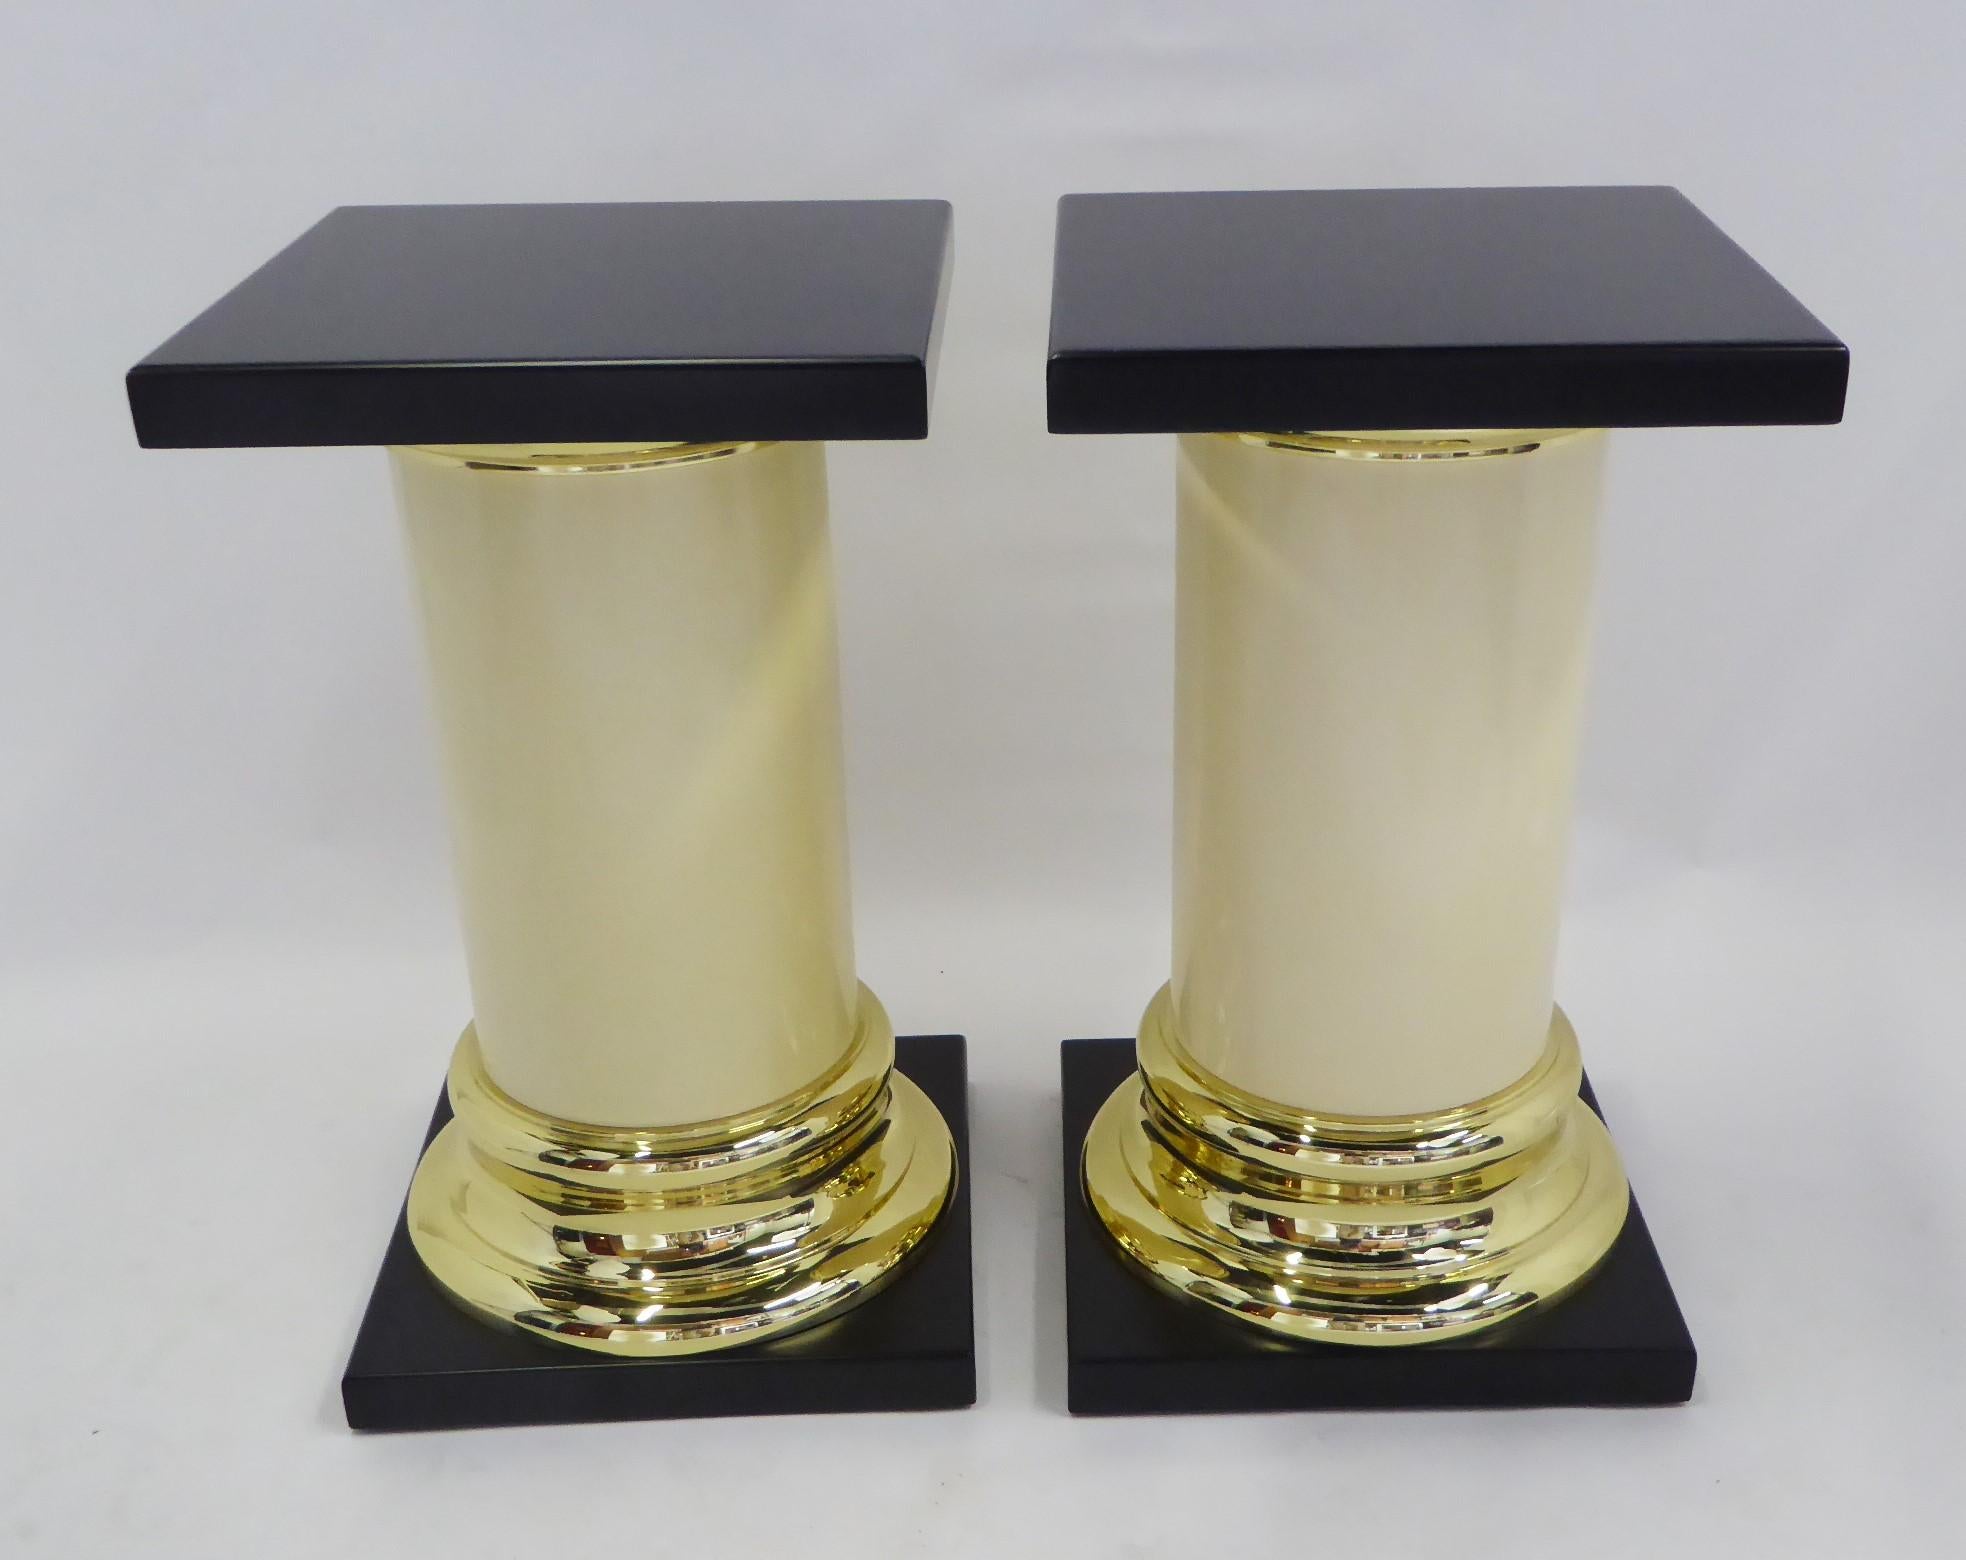 Hollywood Regency Modern Pair Mastercraft Columnar Pedestals Side Tables Neoclassical Style 1960s